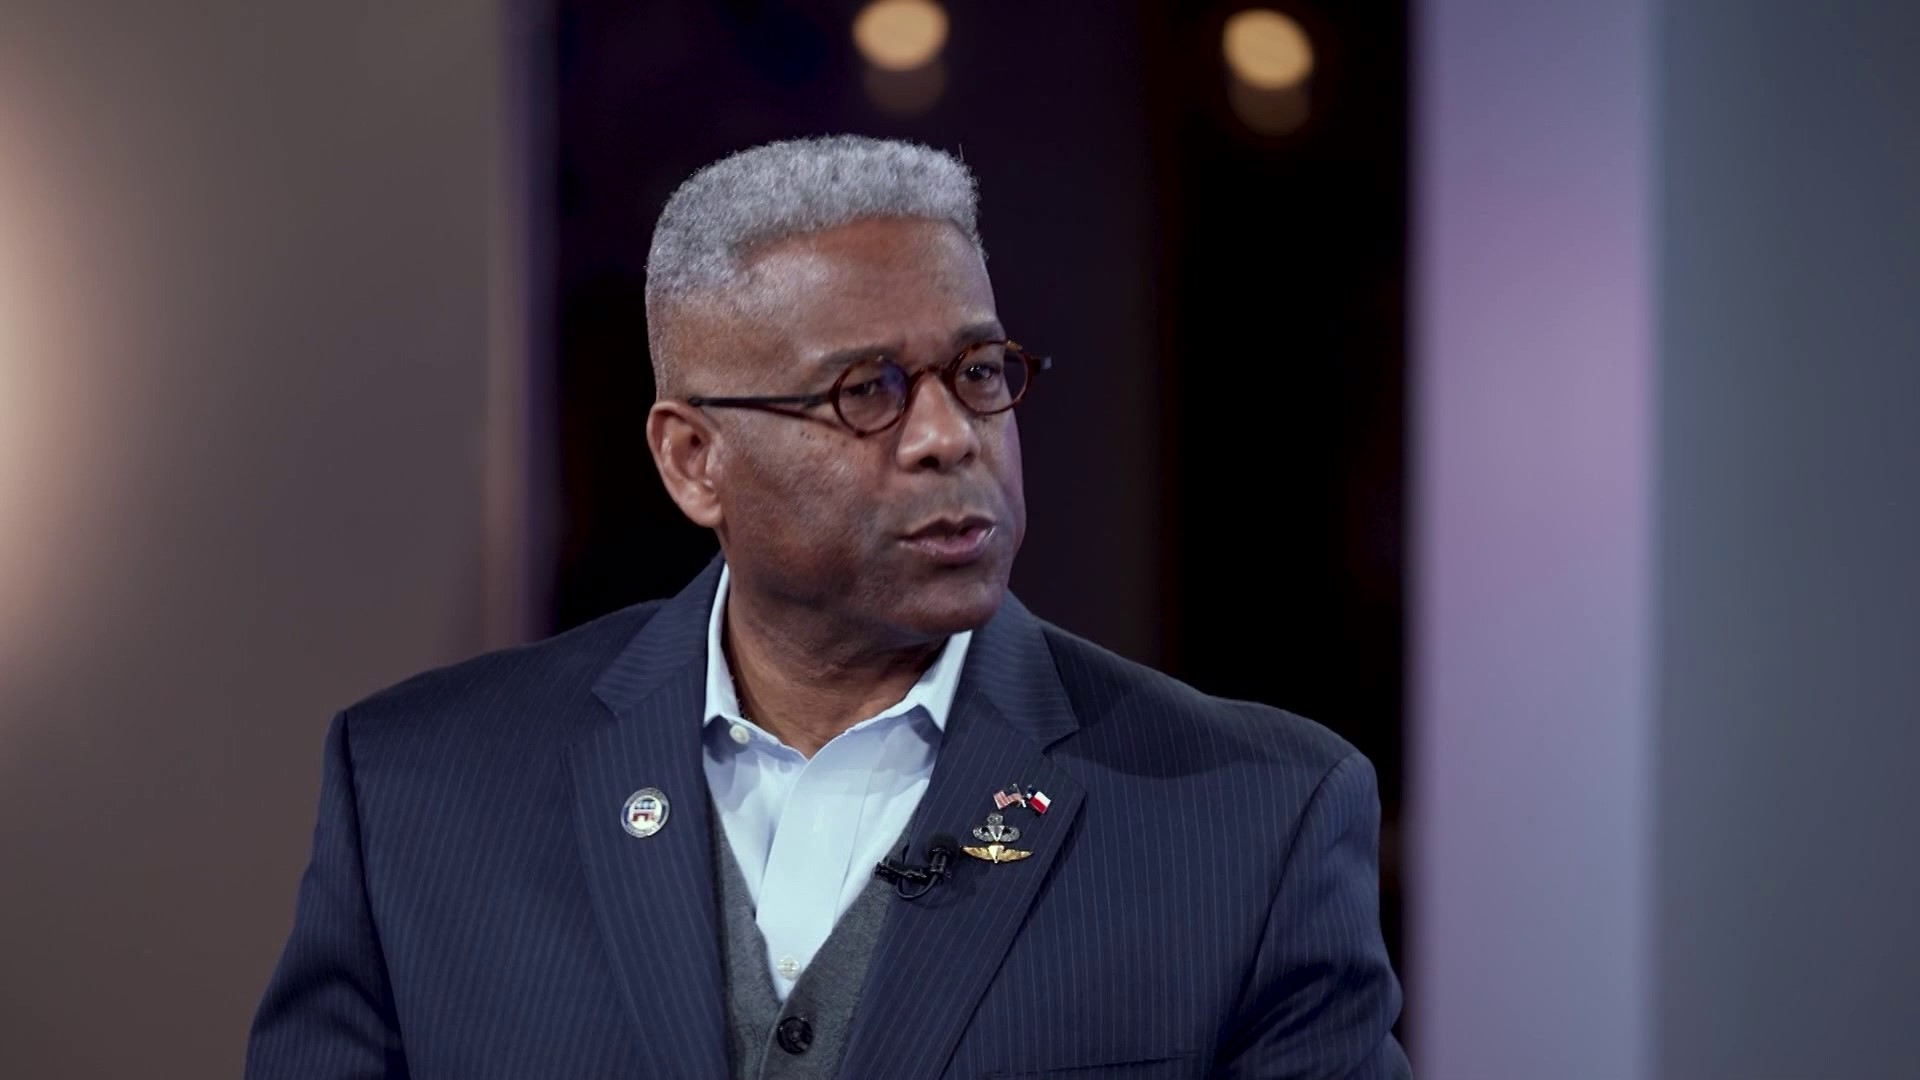 Allen West, who's challenging incumbent Dallas County GOP chair Jennifer Stoddard-Hajdu, says the party must do a better job of recruiting candidates.